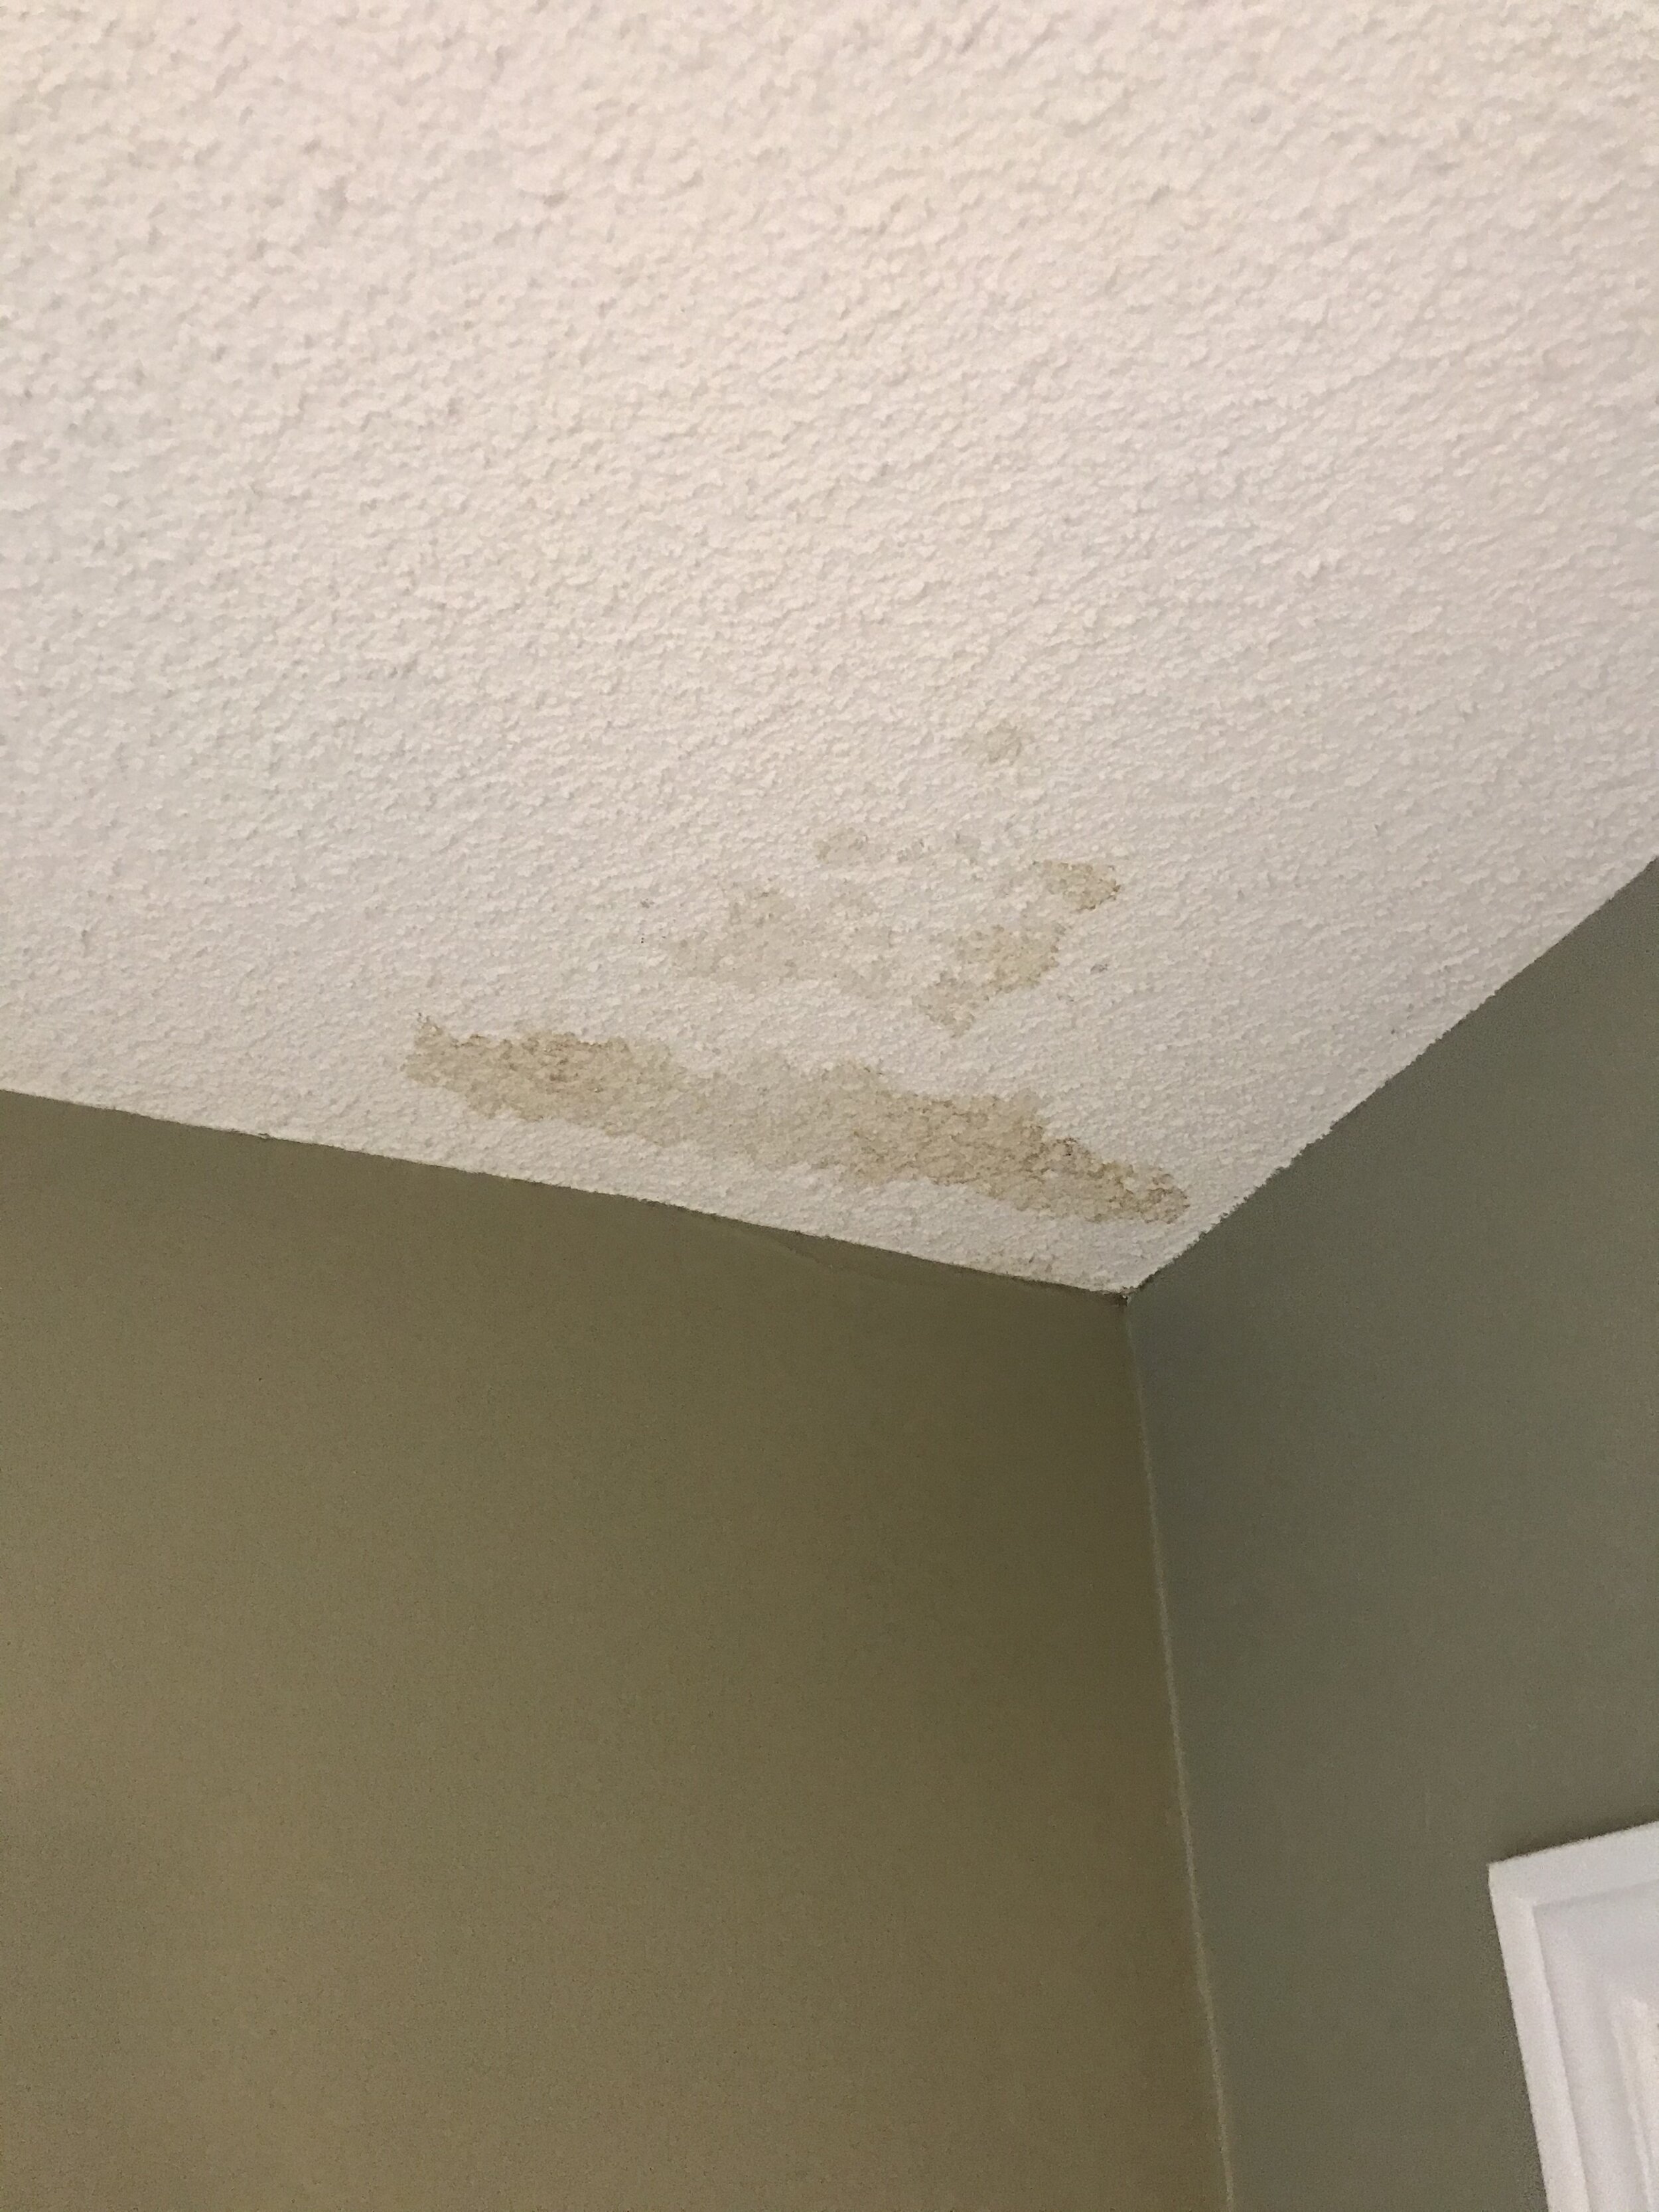 Picture of a stain on ceiling from water leak.jpg